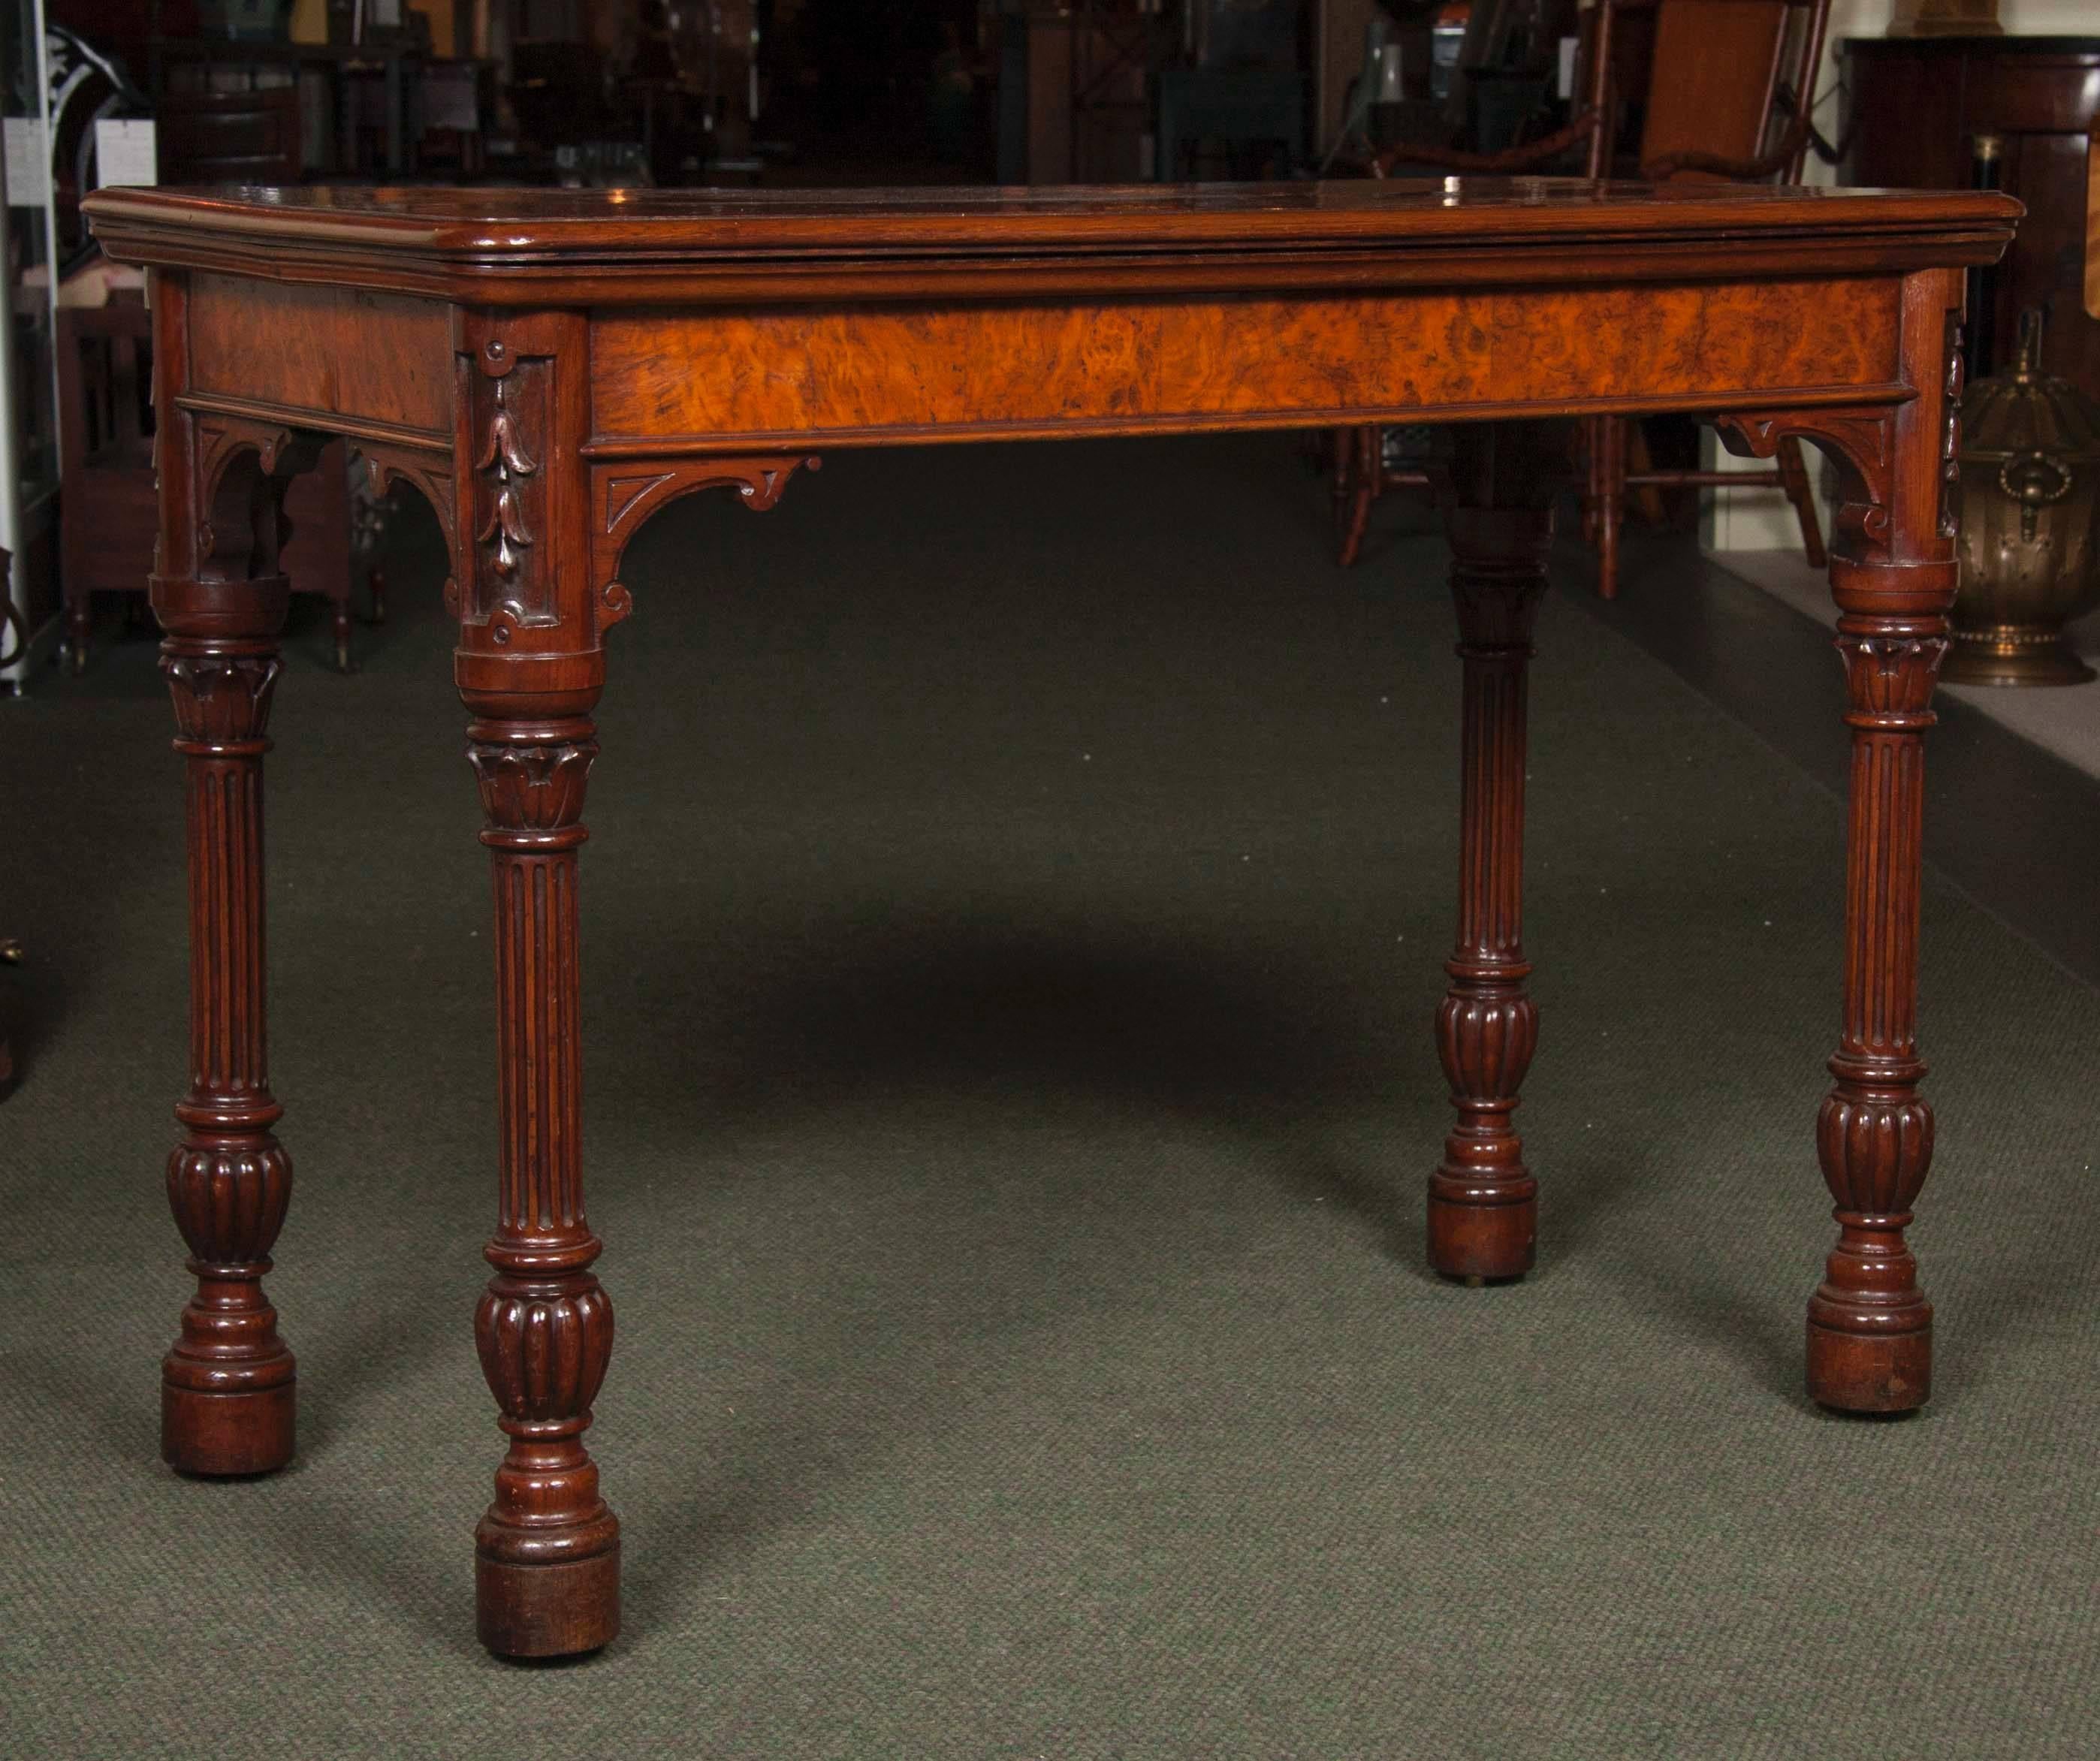 Rare antique pollard oak card table. It boasts a lovely mellow color and is well proportioned with a subtle Gothic influence making it look like a side/serving table when closed. It features a fine quality pollard oak top with thumb moulded edge